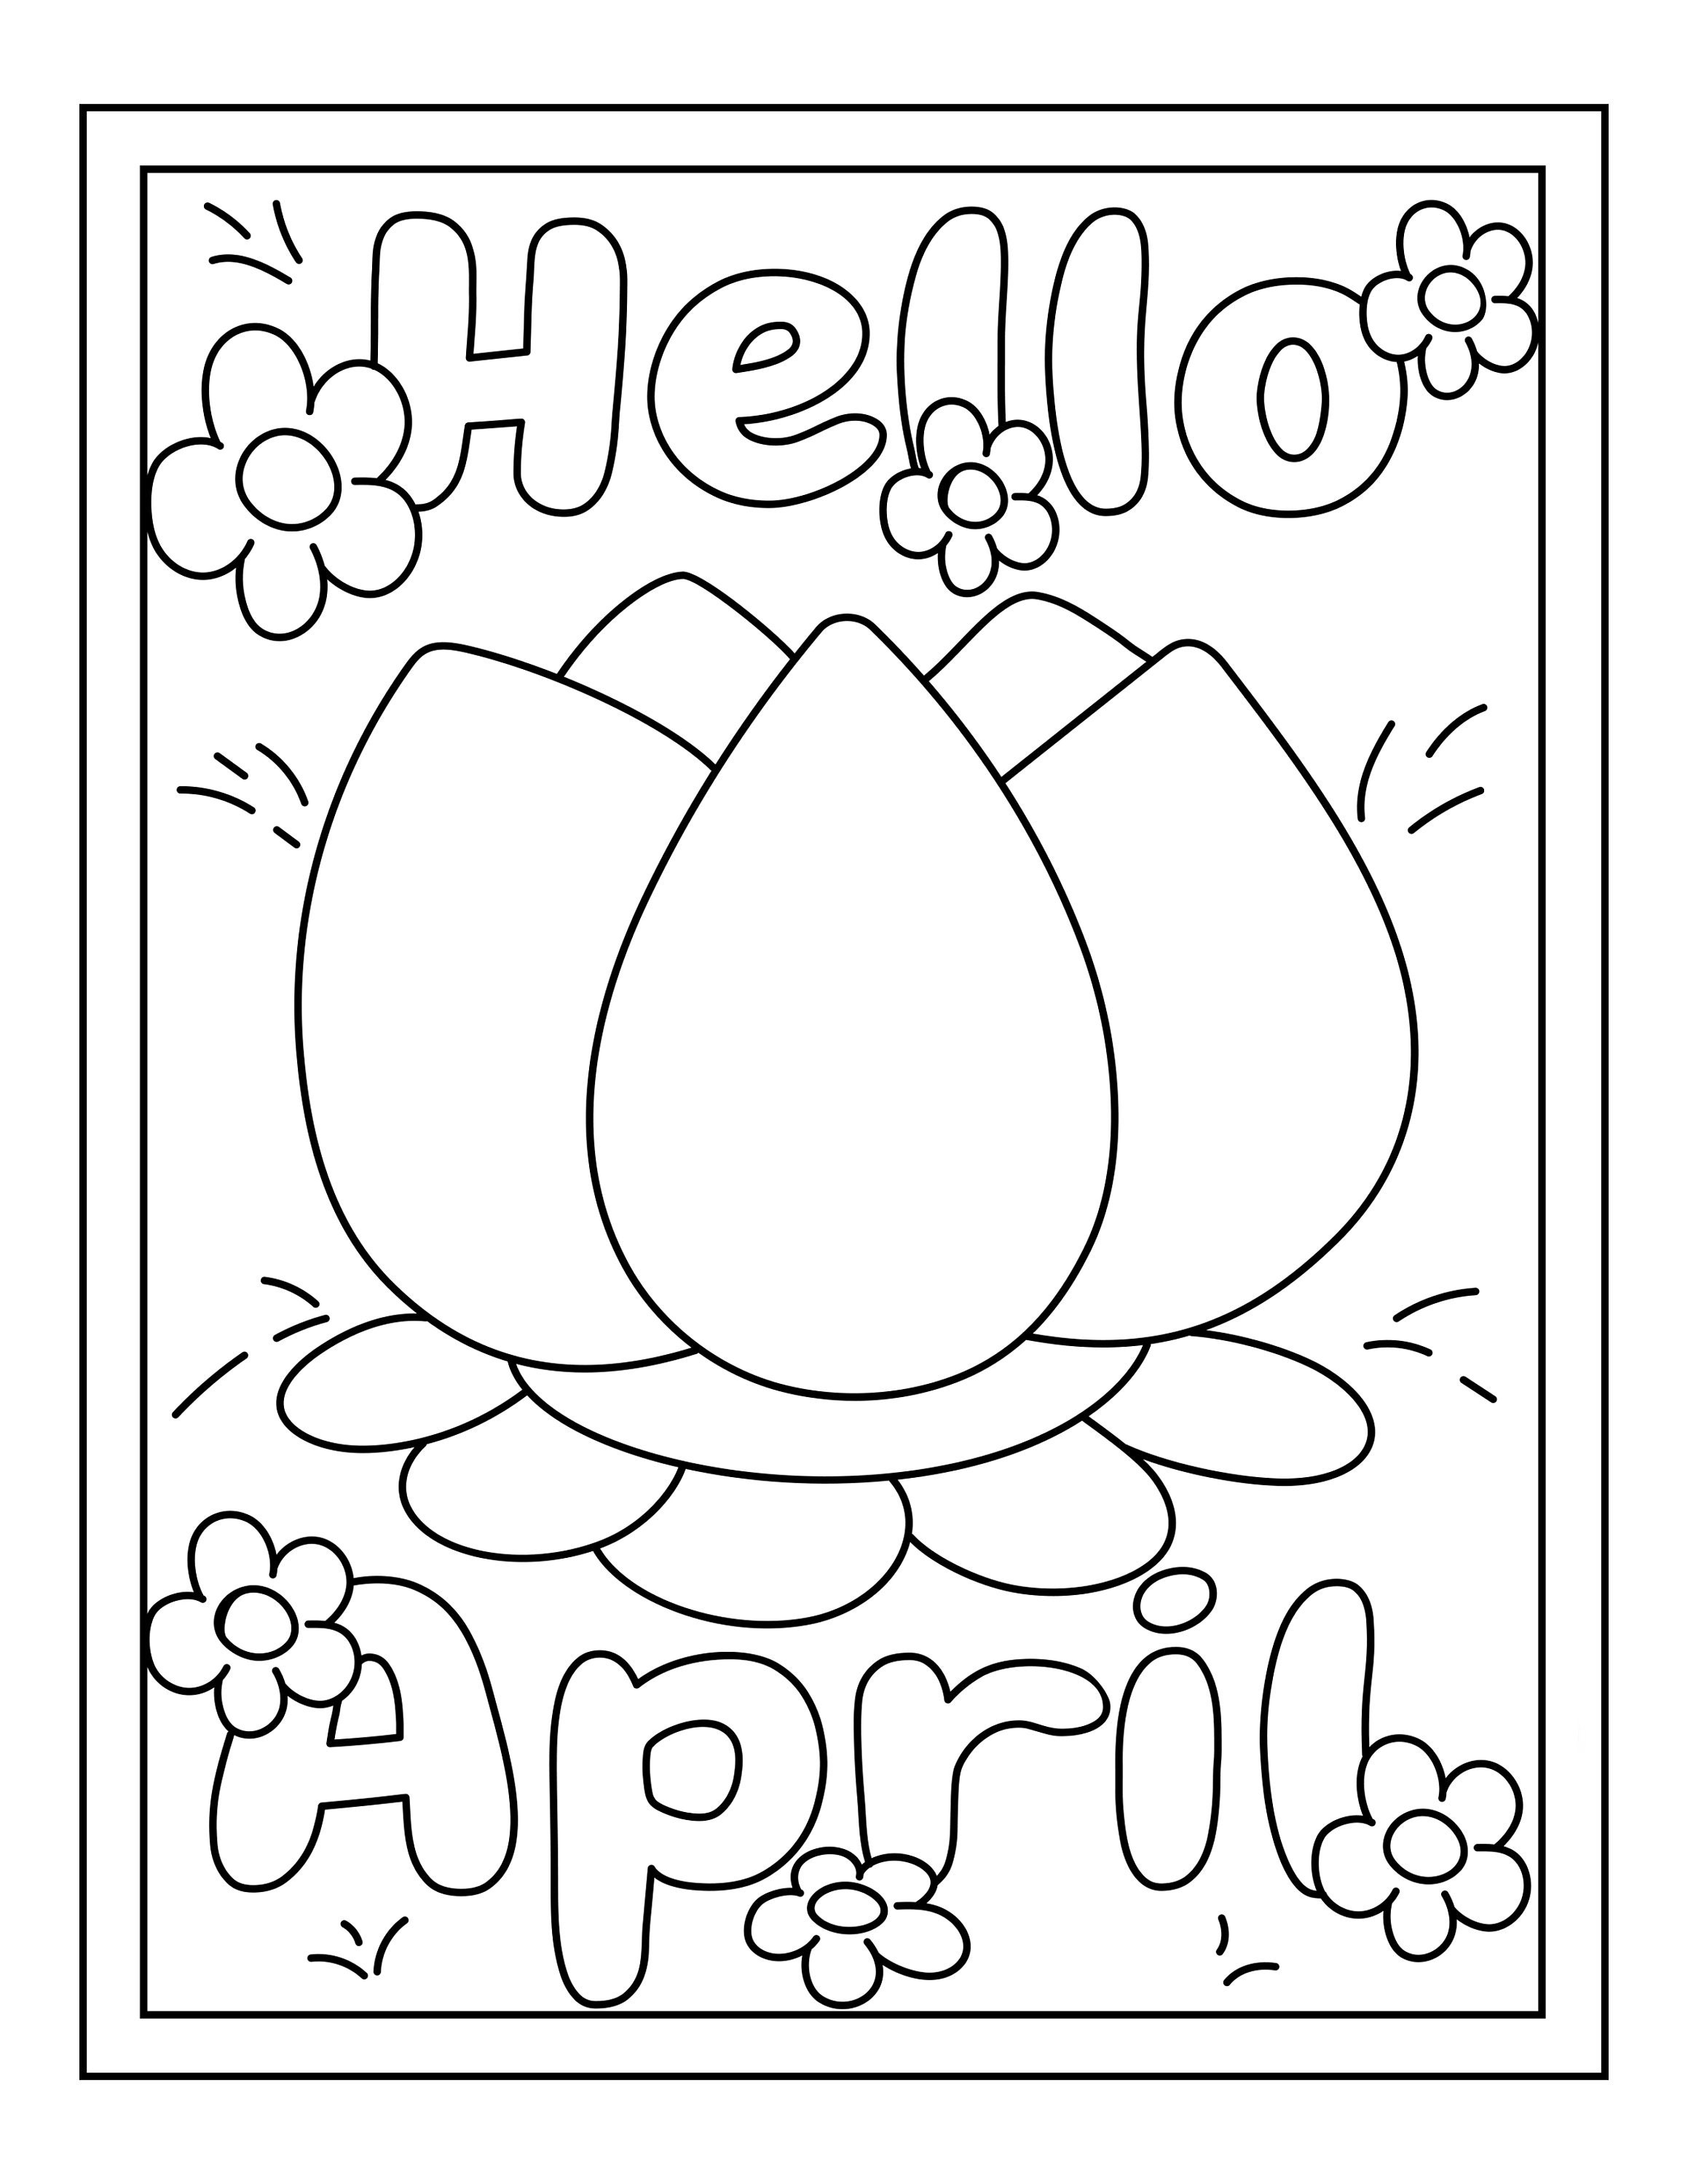 Printable Spring Colouring for Kids Spring Activity Colouring | Etsy